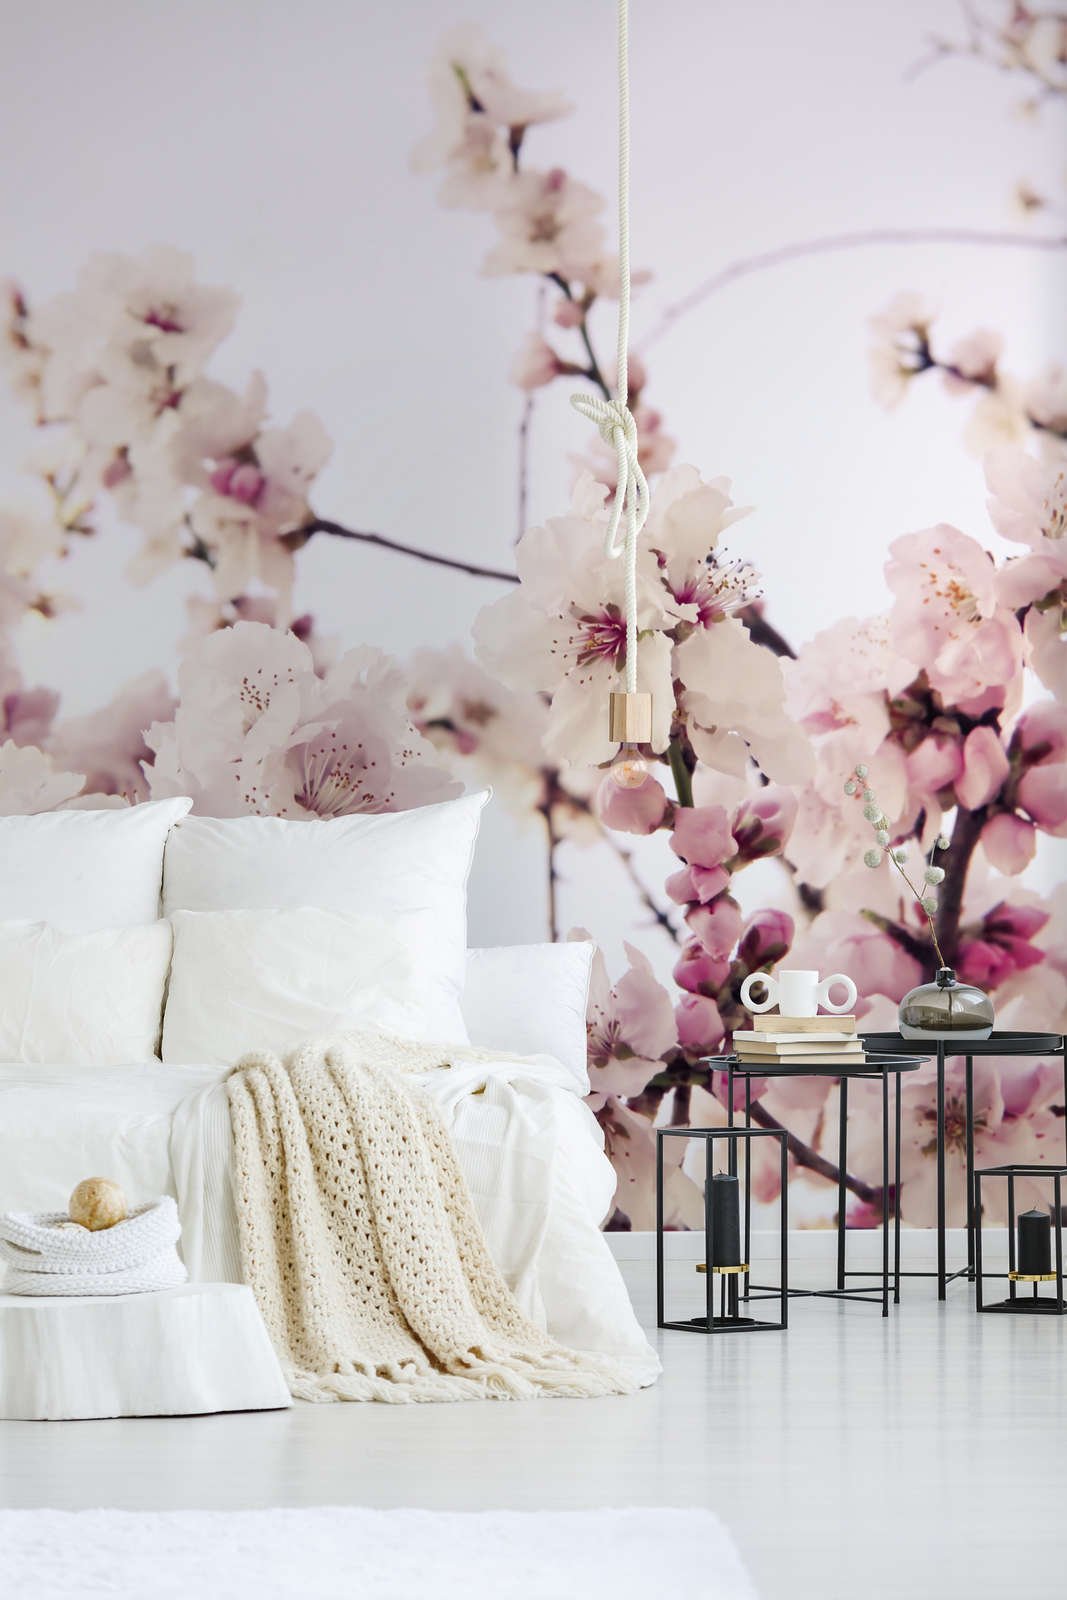             Nature Wallpaper with Cherry Blossoms - Premium Smooth Non-woven
        